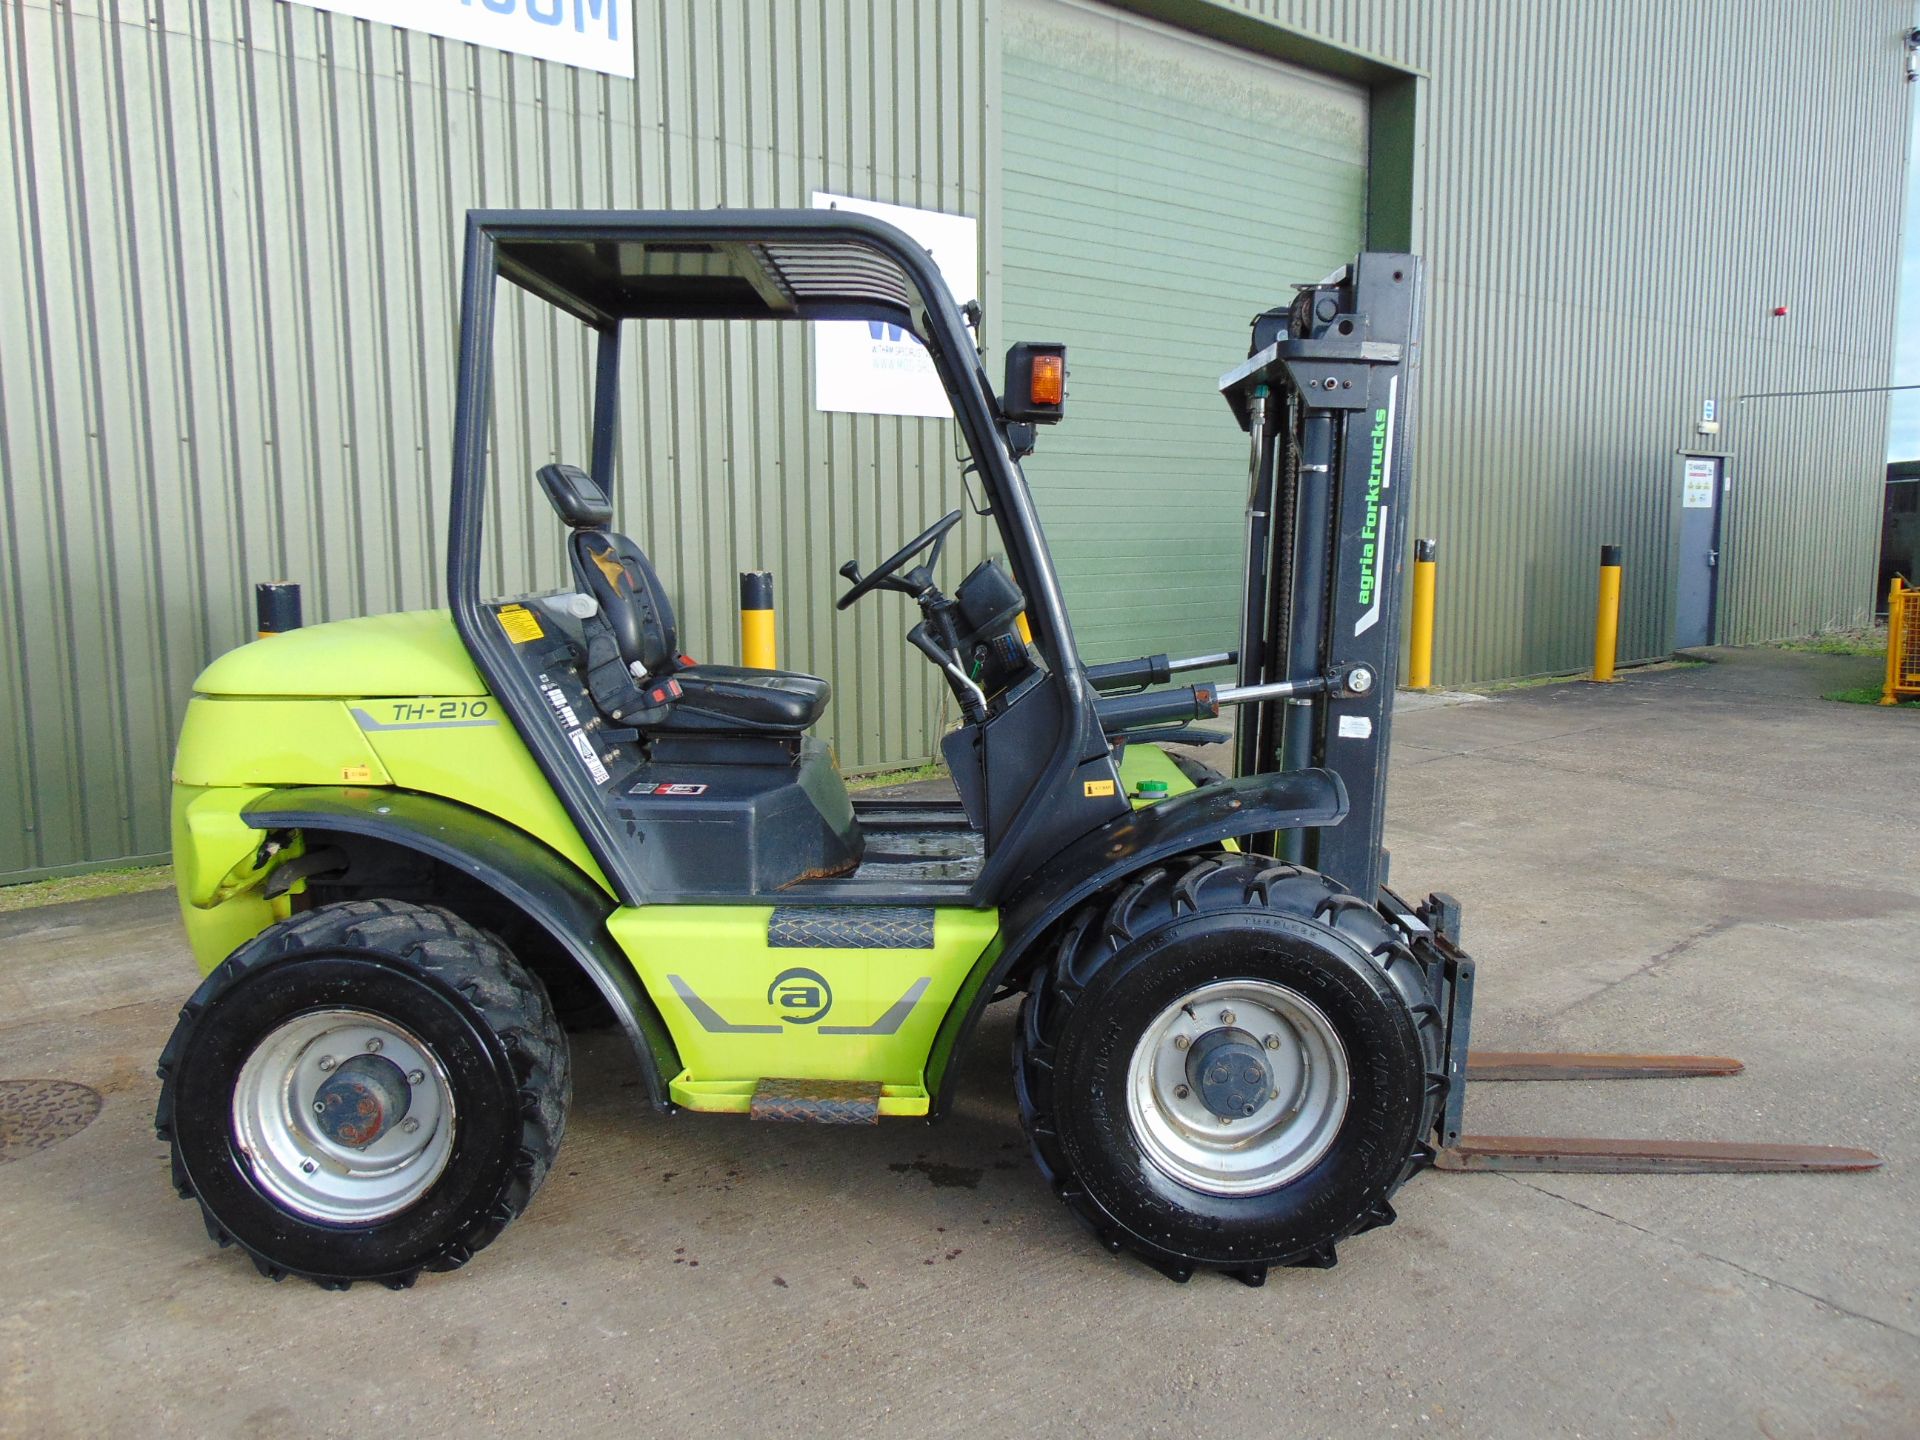 2011 Agrimac Agria TH210 4x4 Rough Terrain Diesel Forklift ONLY 1,918 HOURS!!! - Image 6 of 30